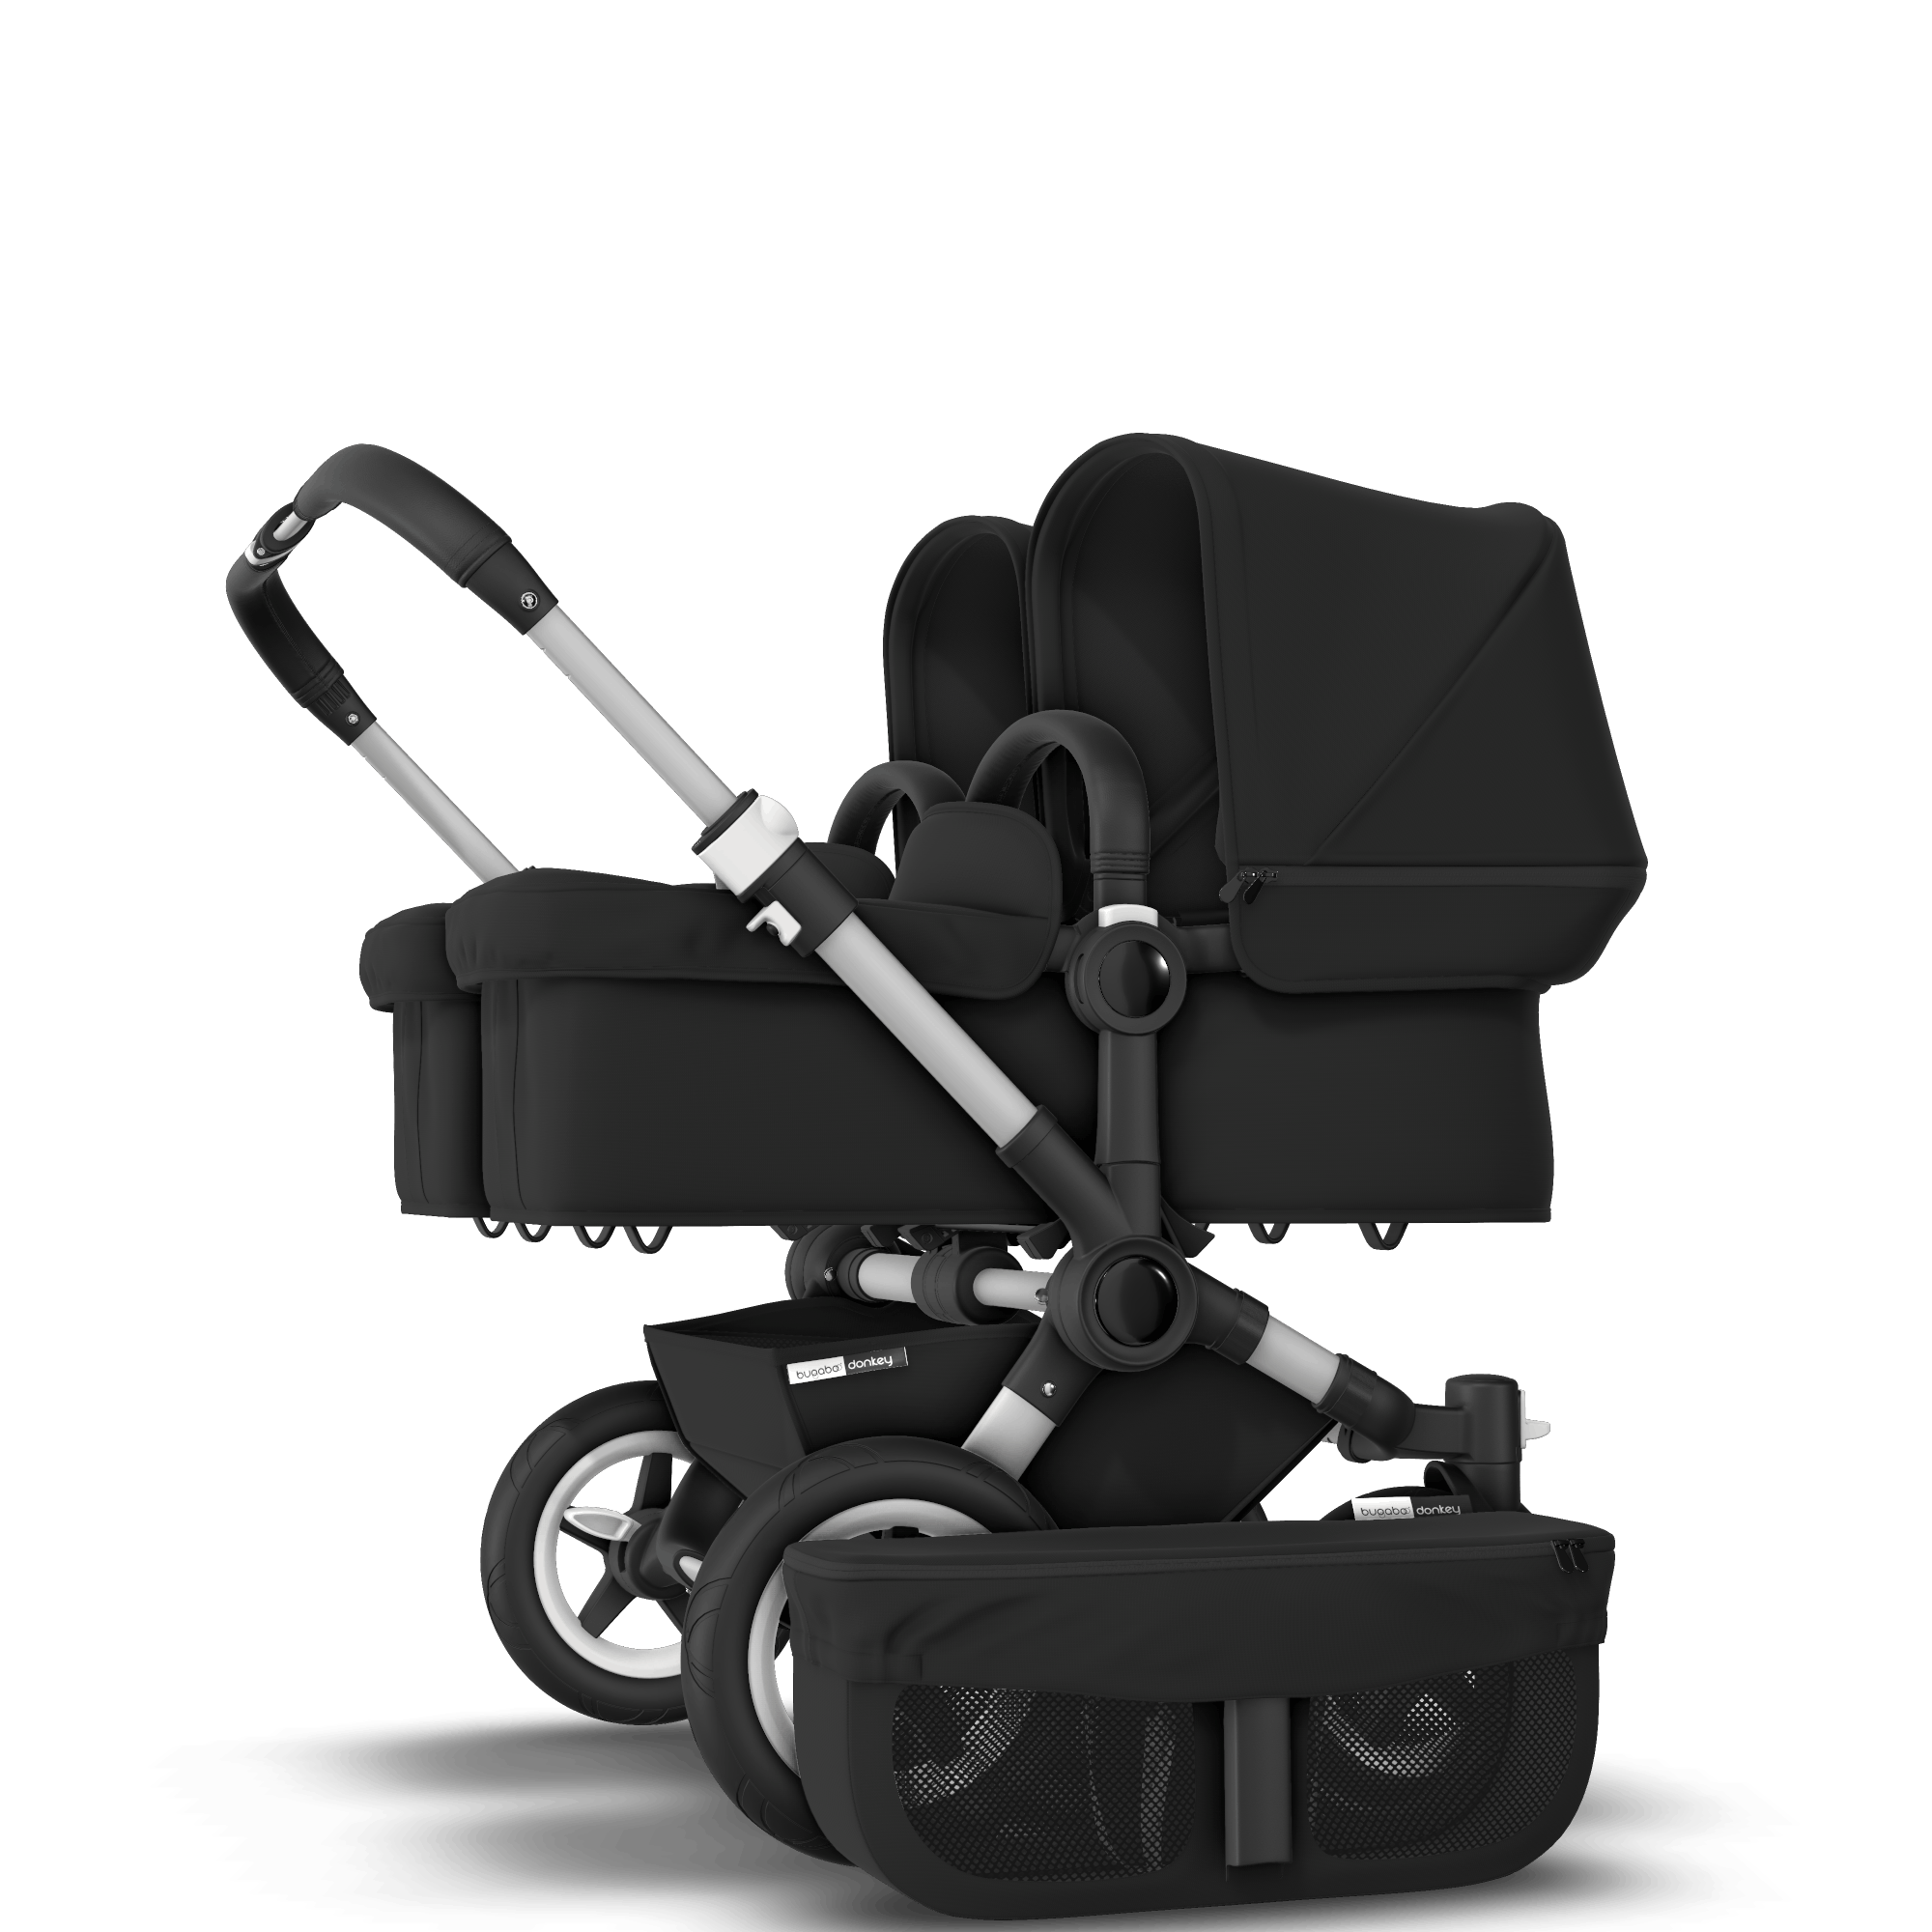 bugaboo two seater